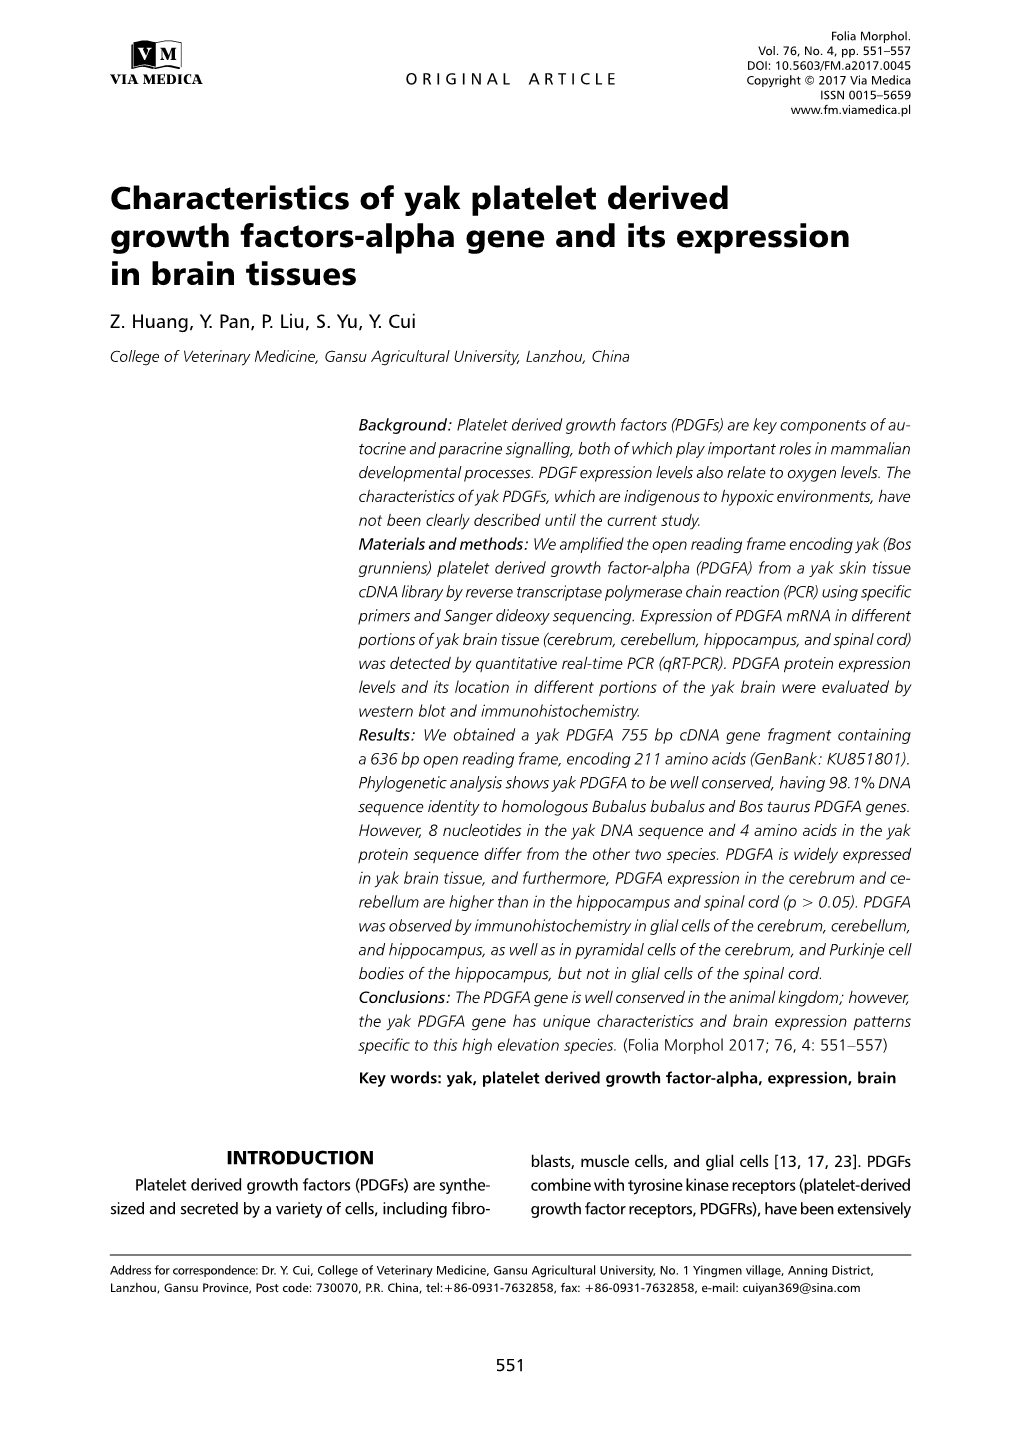 Characteristics of Yak Platelet Derived Growth Factors-Alpha Gene and Its Expression in Brain Tissues Z